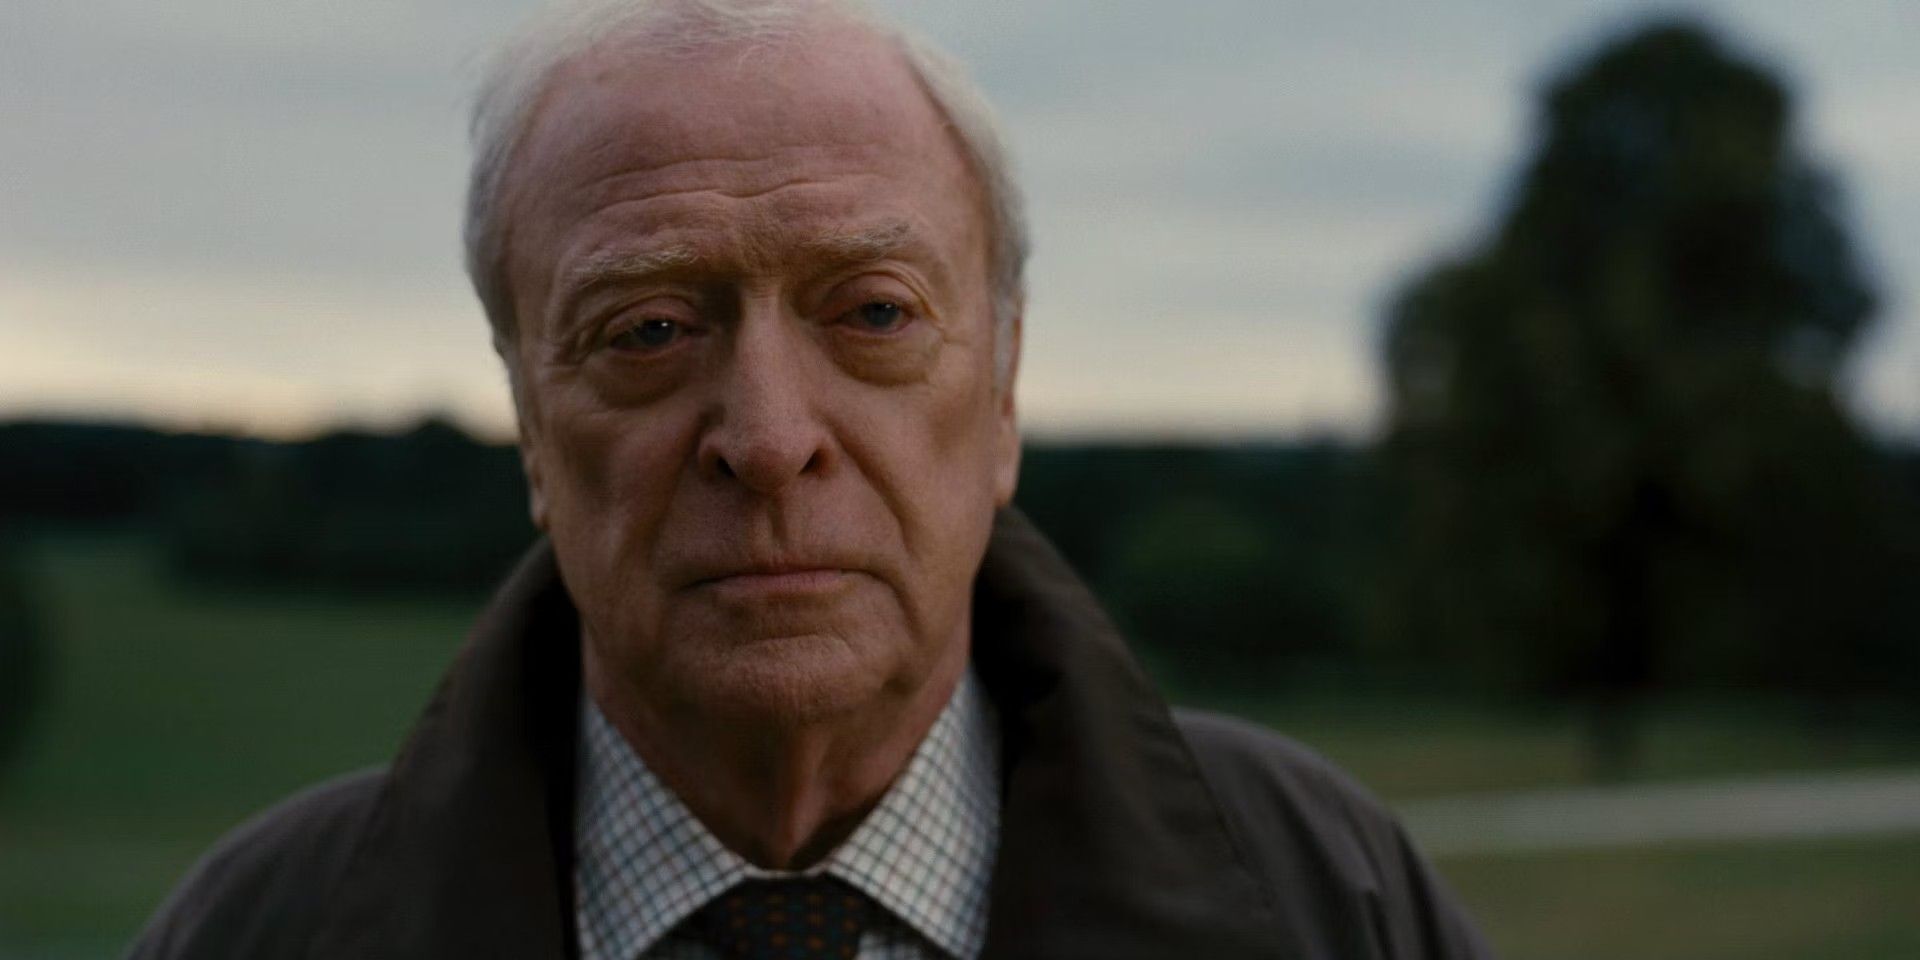 Why Christopher Nolan Casts Michael Caine In So Many Movies